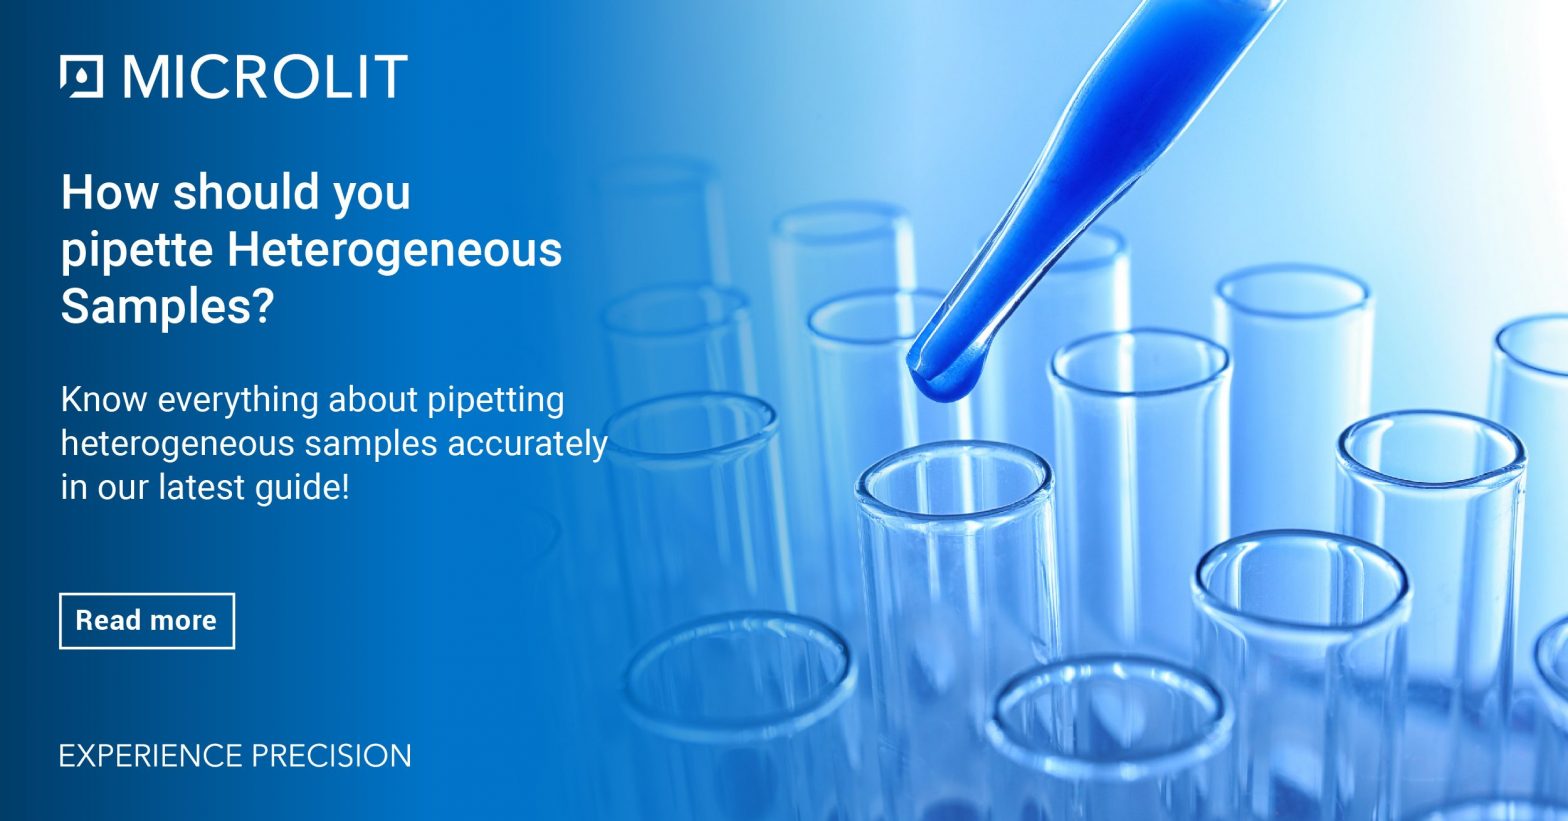 How to do pipetting heterogeneous samples correctly 1